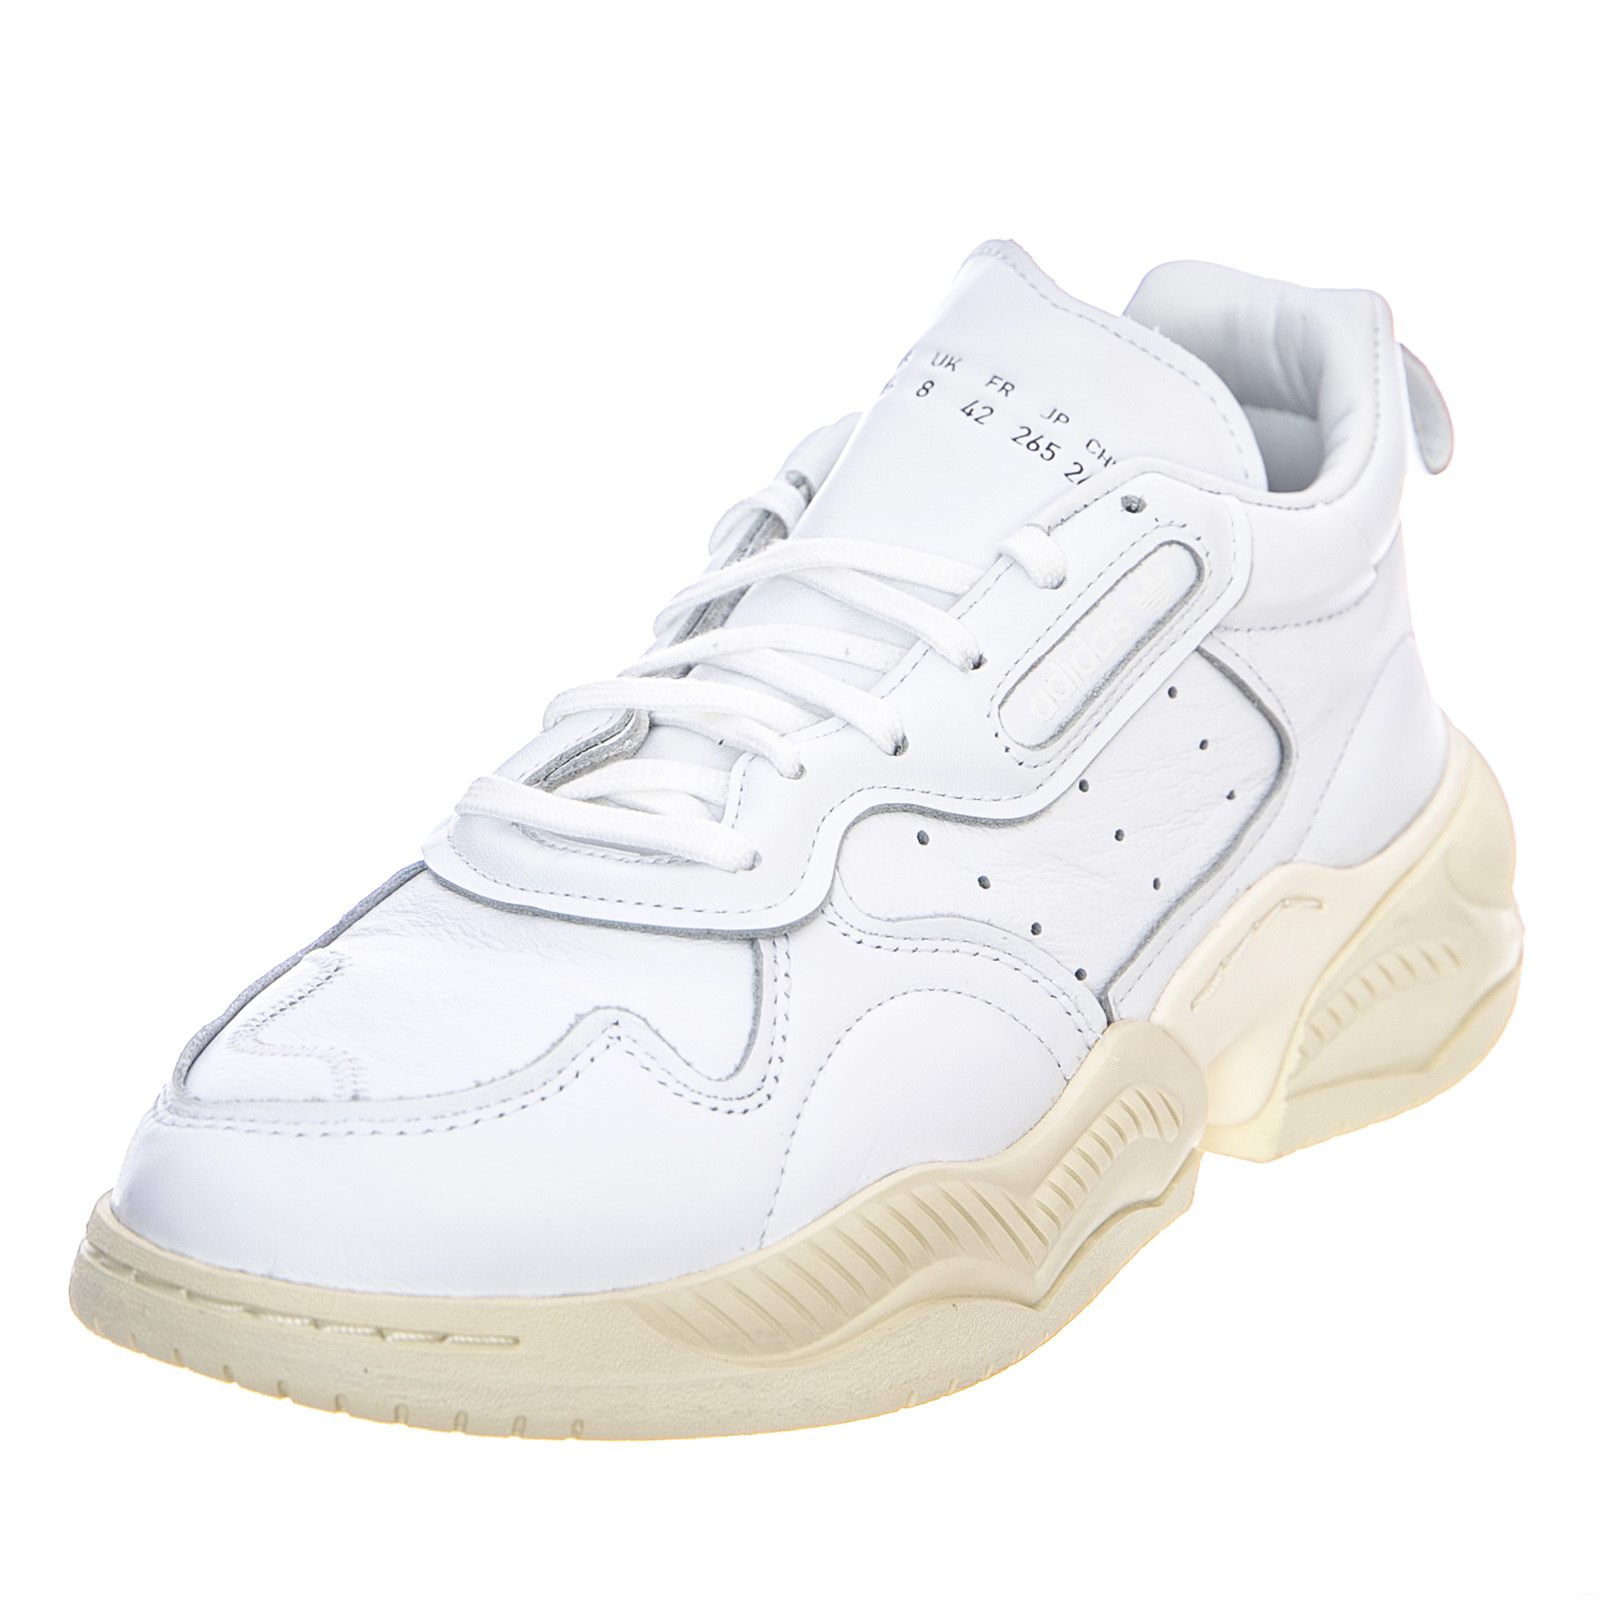 adidas Supercourt RX Shoes Crystal White/Core Black/Off 